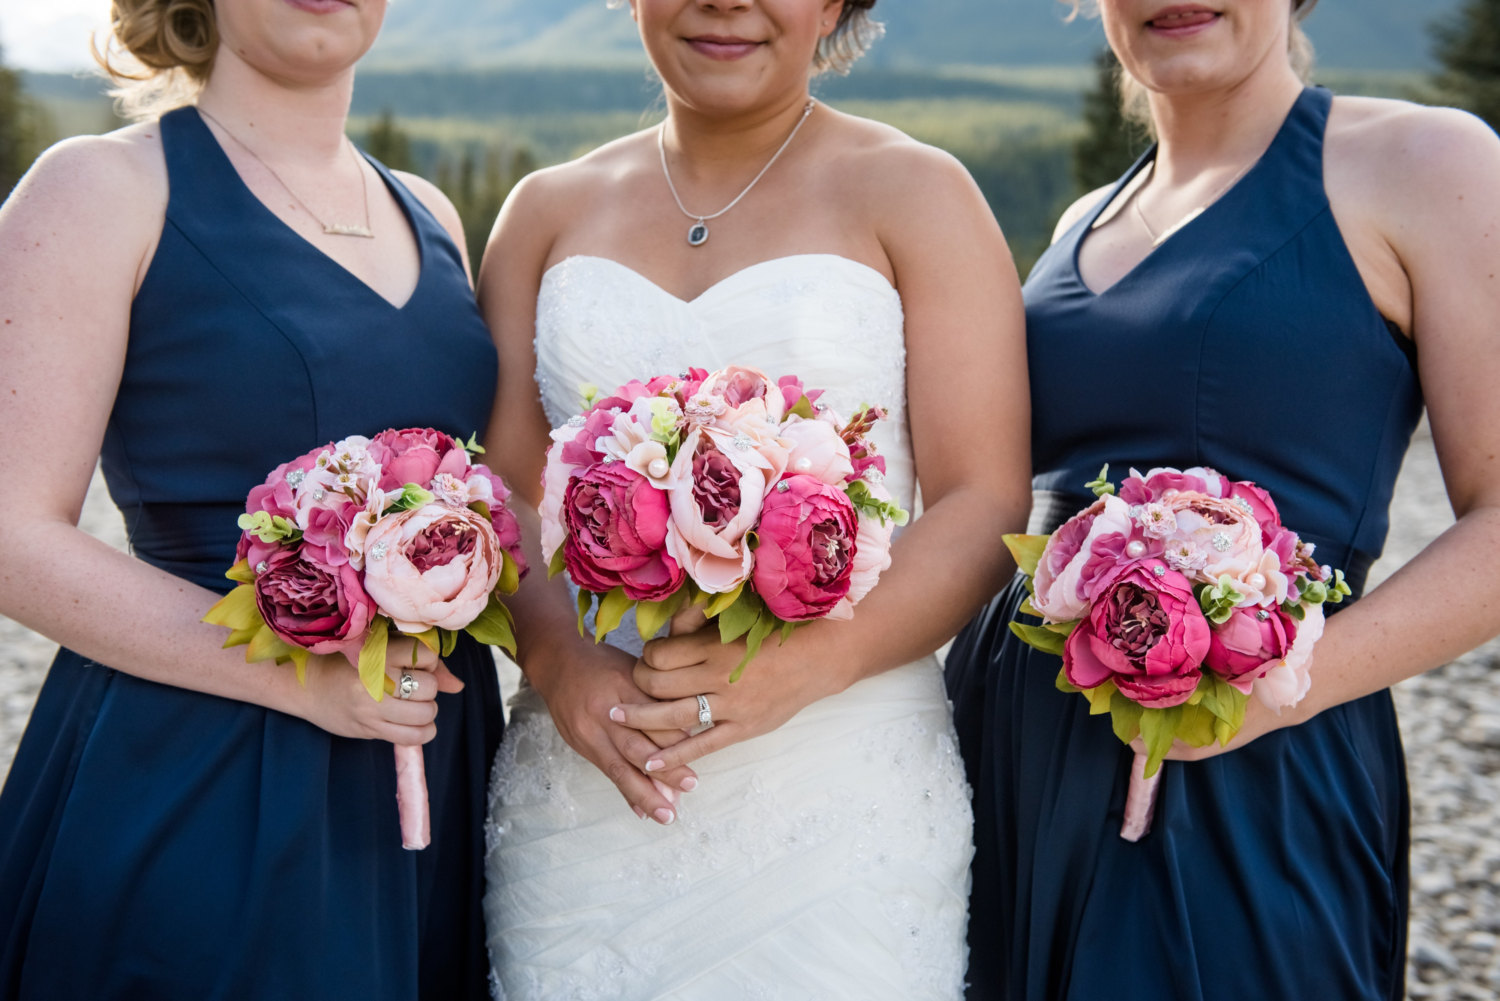 Where to Buy Silk Pink Peony Bouquets for Weddings That Look Real - Photo by Paisley Photography. Bouquet by Fashion Touch Weddings. | https://emmalinebride.com/bride/pink-peony-bouquets-for-weddings/